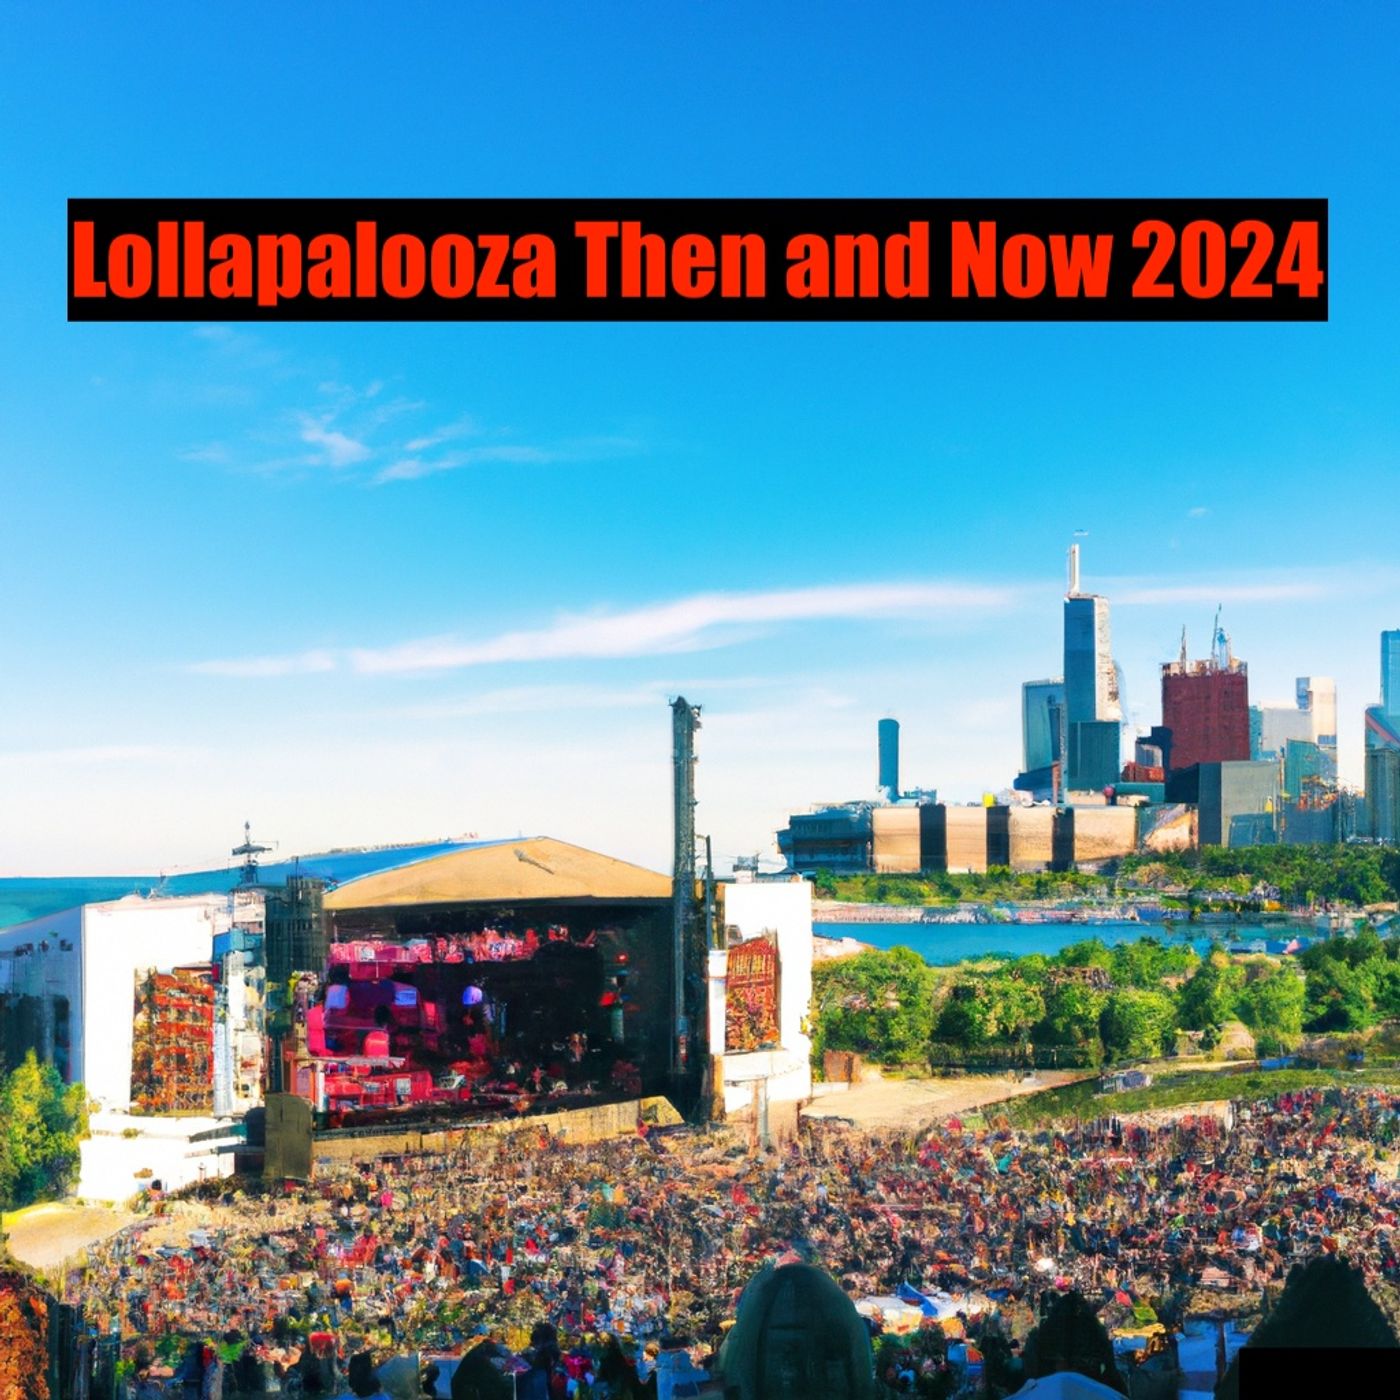 Lollapalooza Then and Now 2024